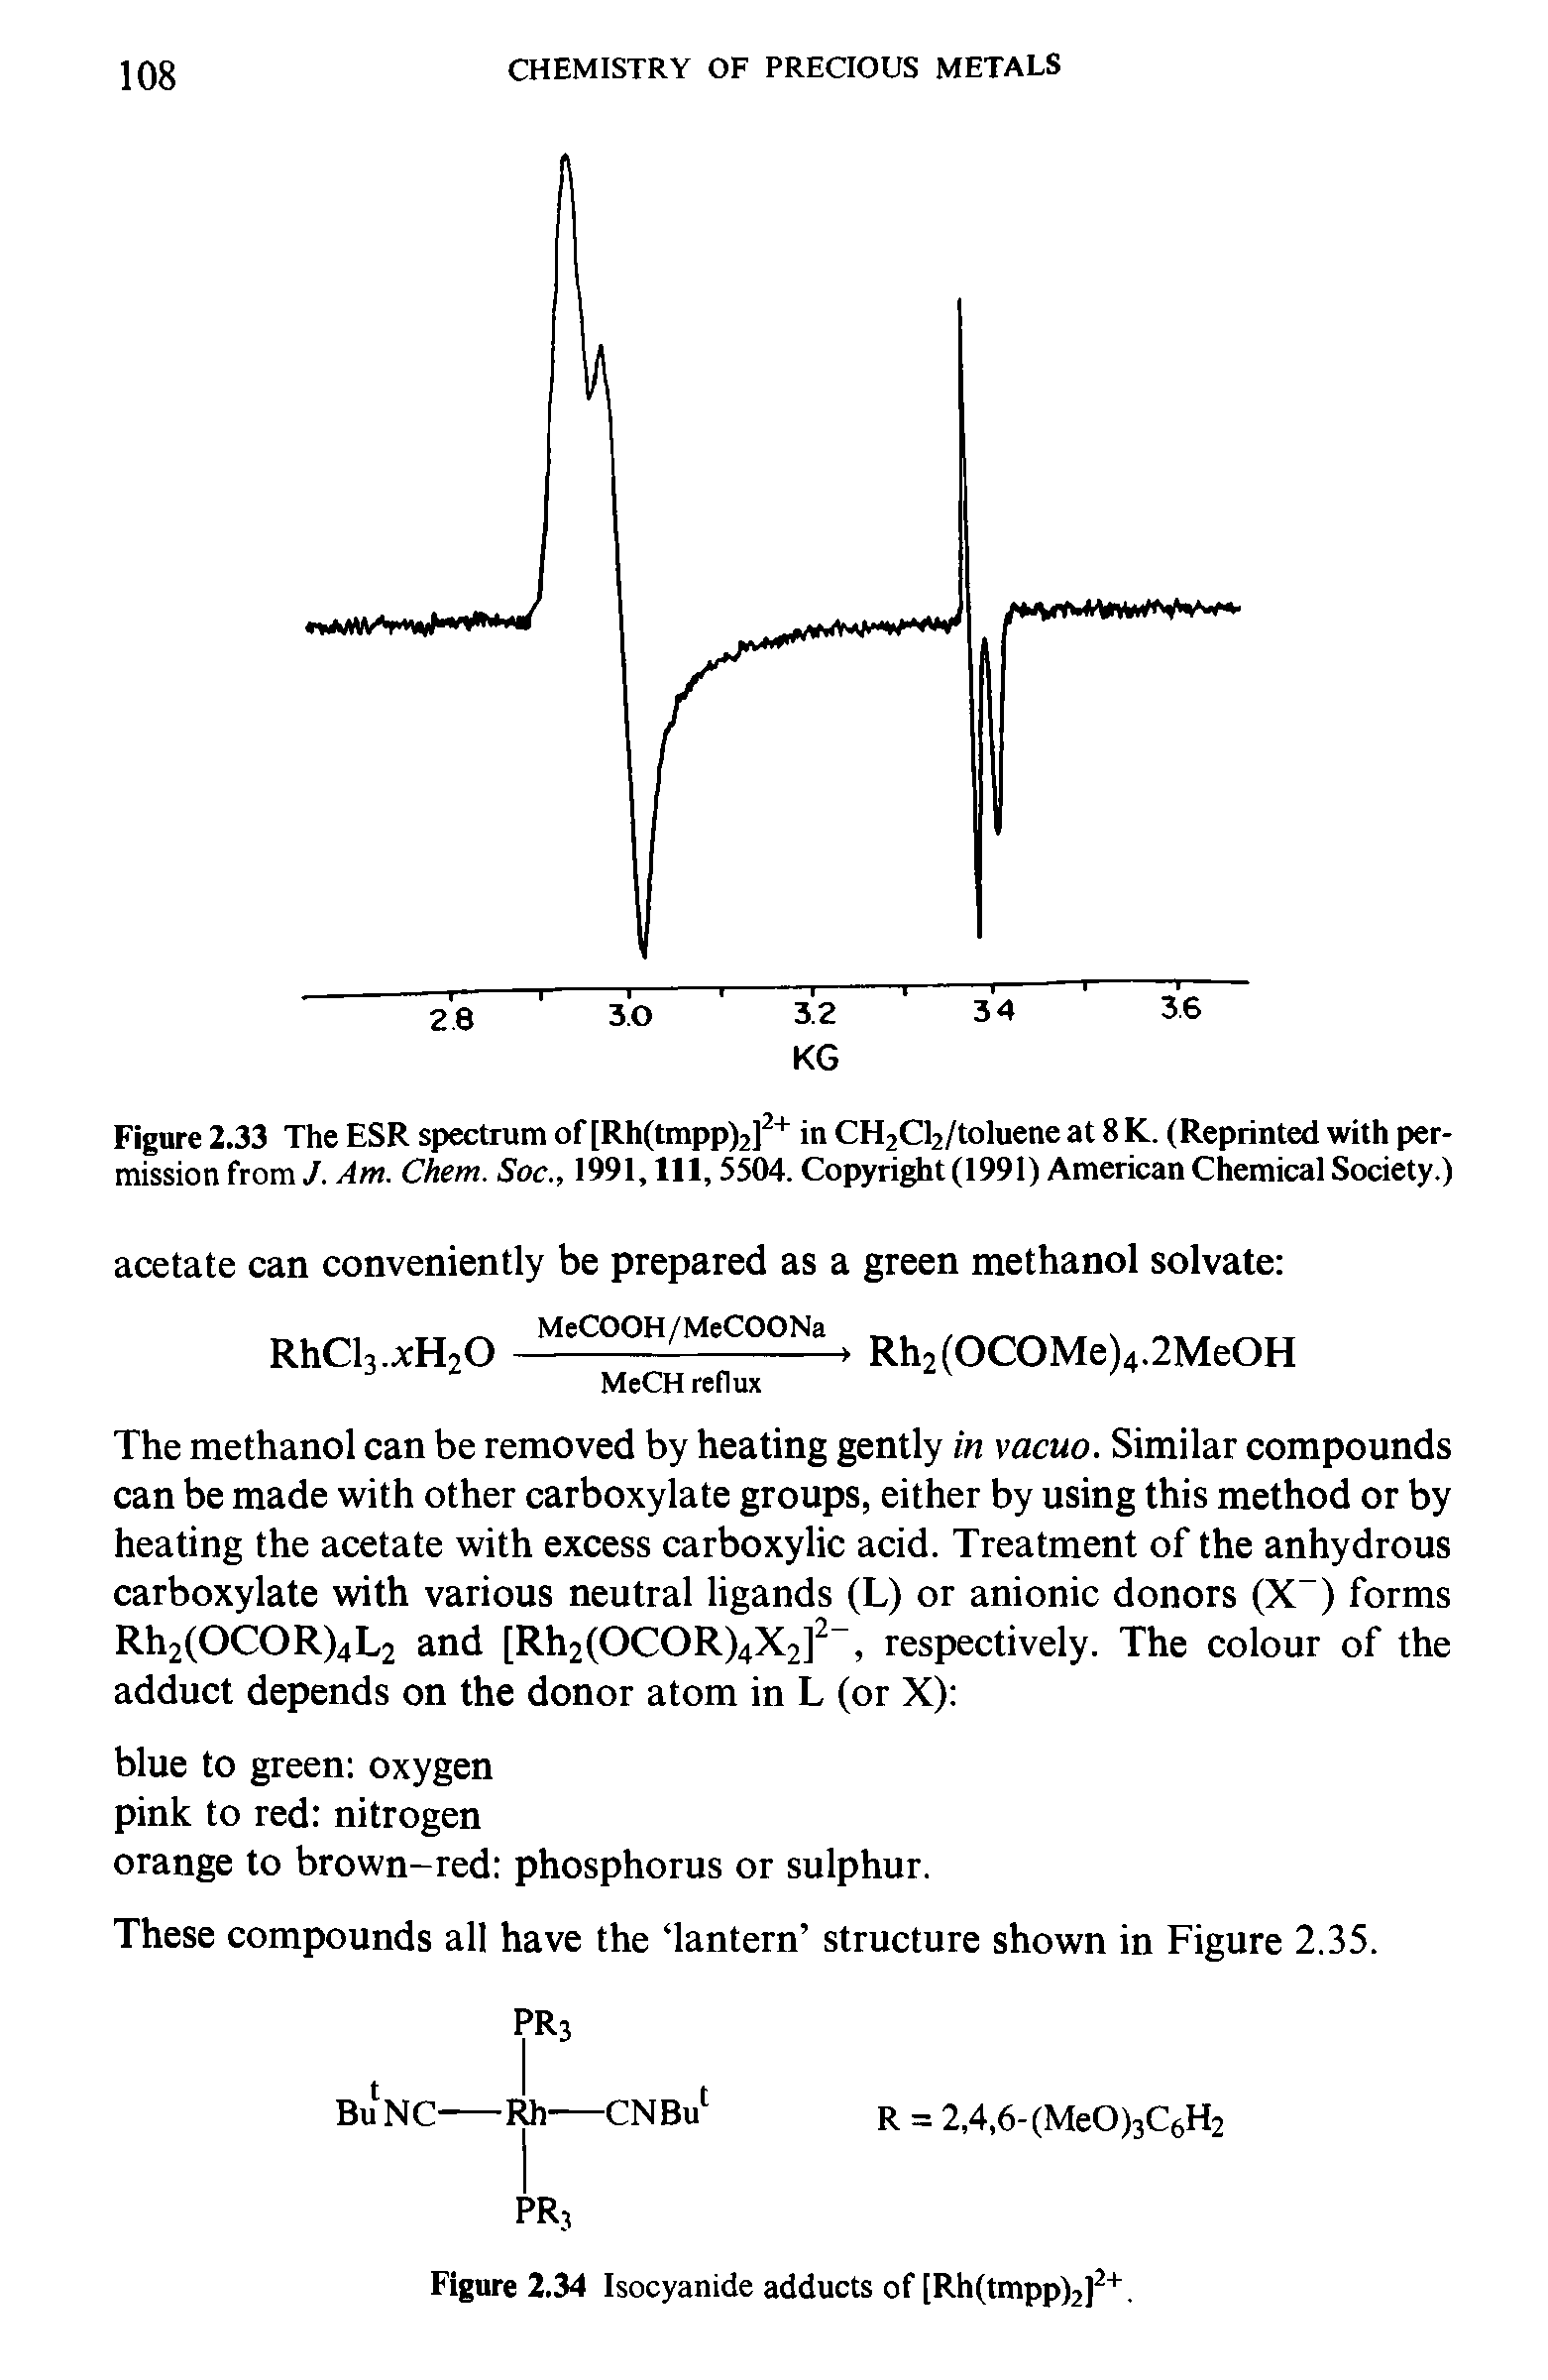 Figure 2.33 The ESR spectrum of [Rh(tmpp)2]2+ in CH2Cl2/toluene at 8 K. (Reprinted with permission from J. Am. Chem. Soc., 1991, 111, 5504. Copyright (1991) American Chemical Society.)...